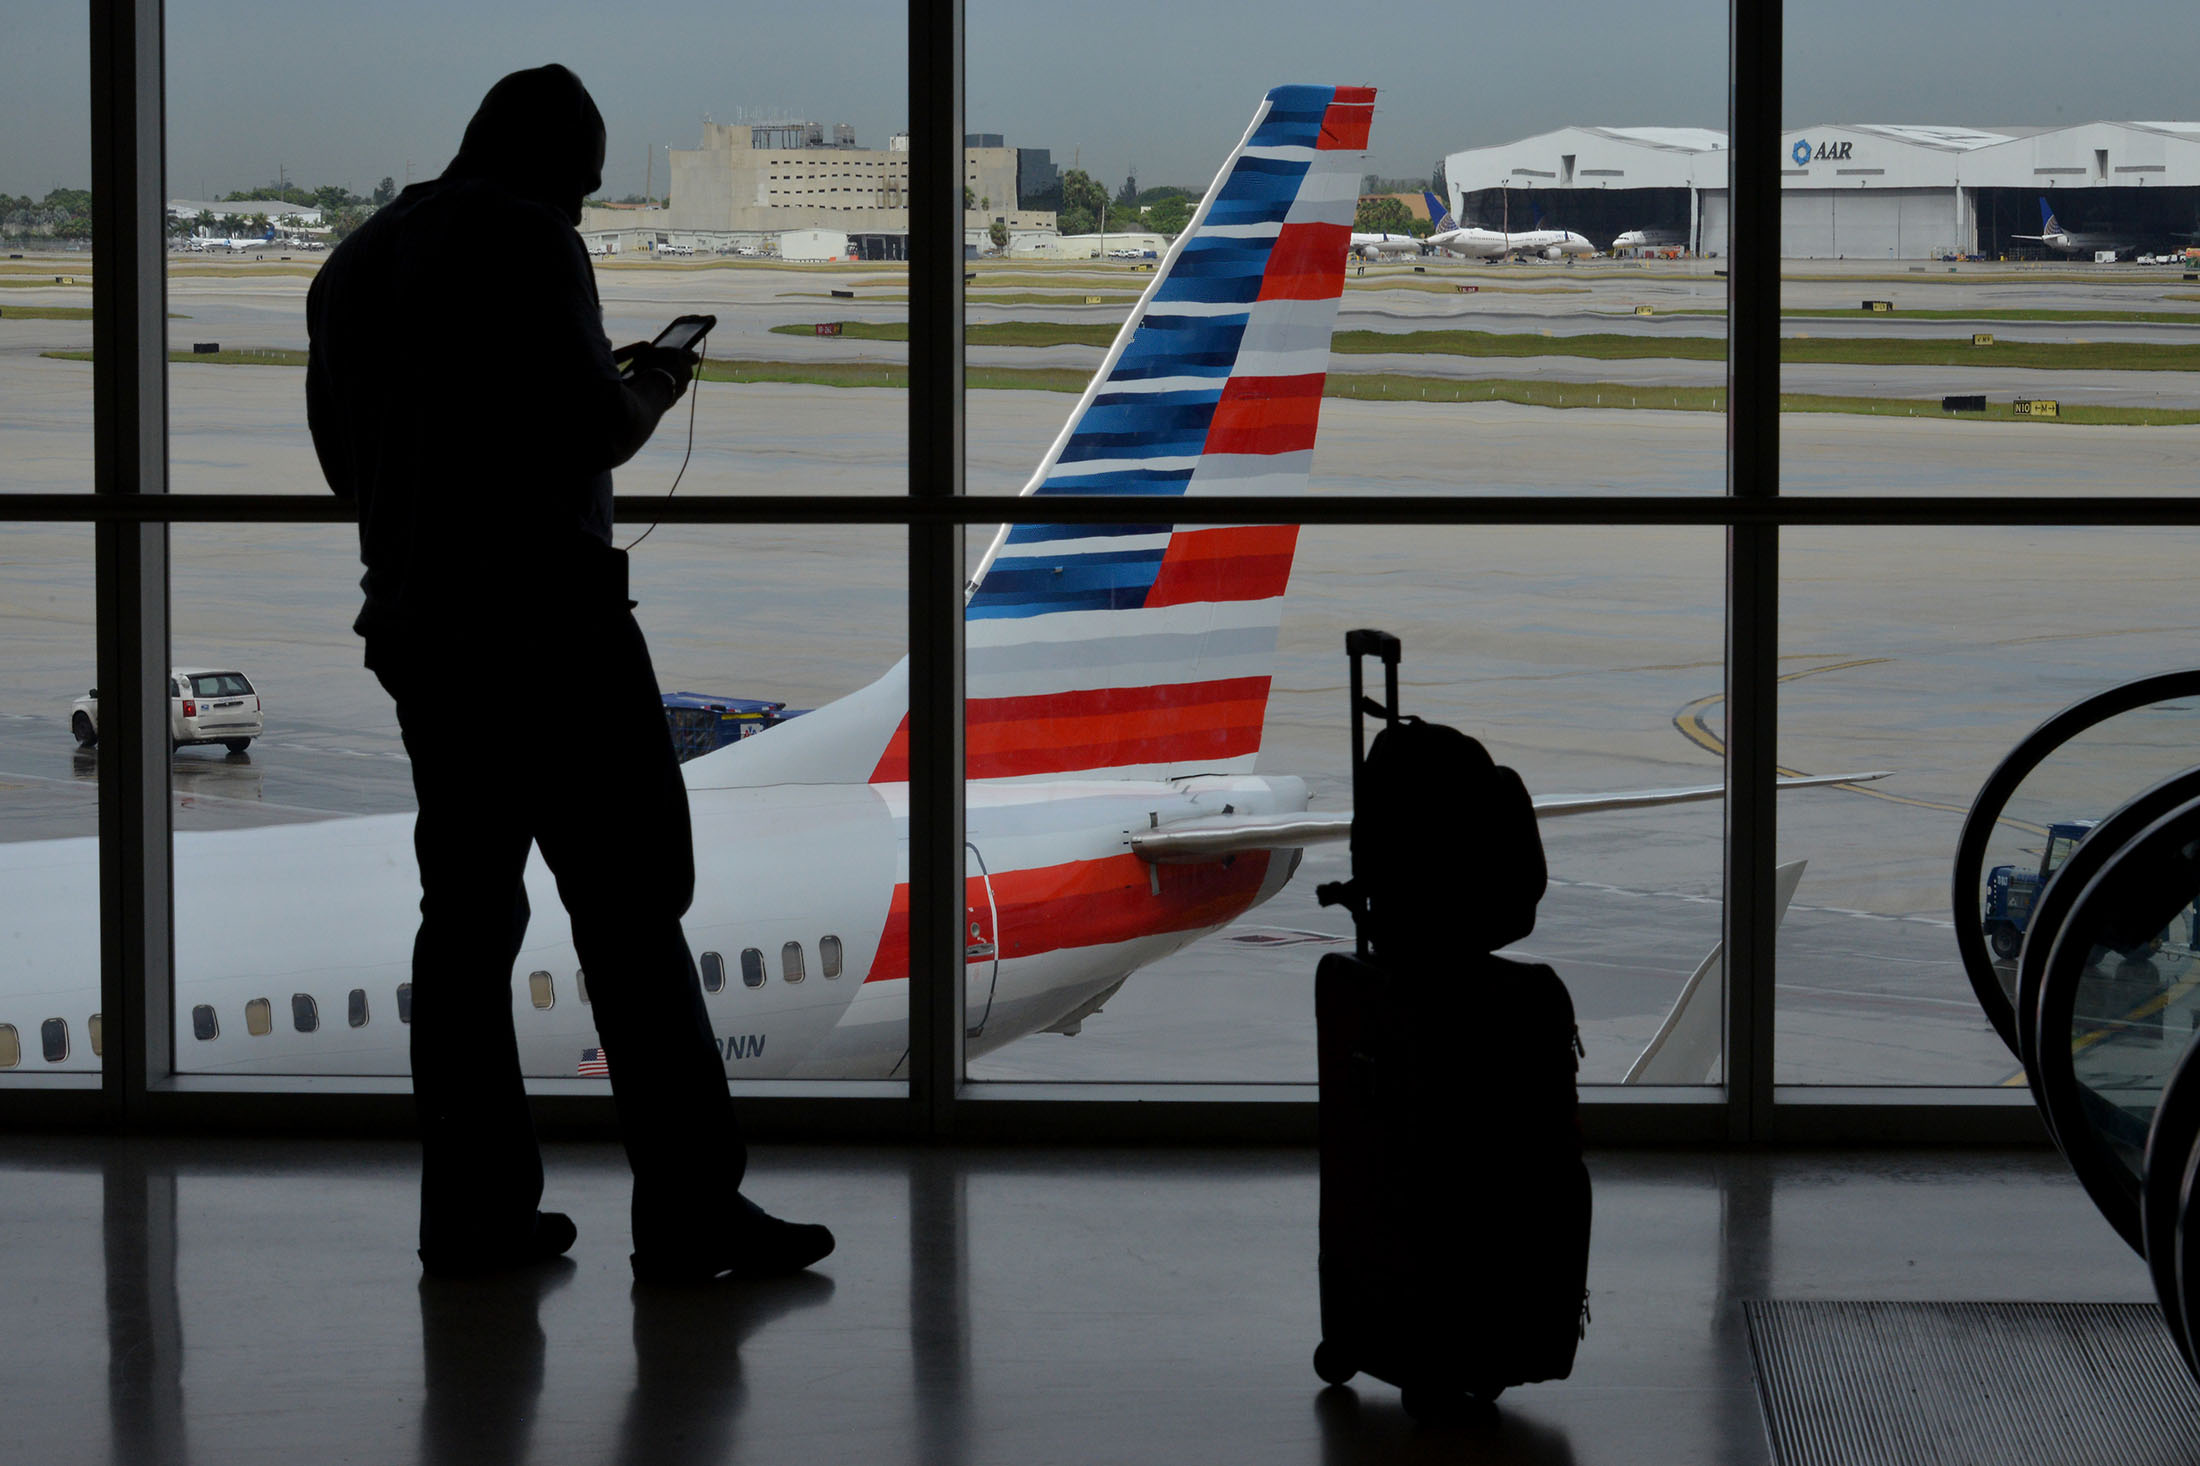 The silhouette of a traveler is seen at the American Airlines Group Inc. terminal of Miami International Airport (MIA) in Miami, Florida, U.S., on Tuesday, Sept. 23, 2014. American Airlines Group Inc. is scheduled to release earnings figures on Oct. 17.
